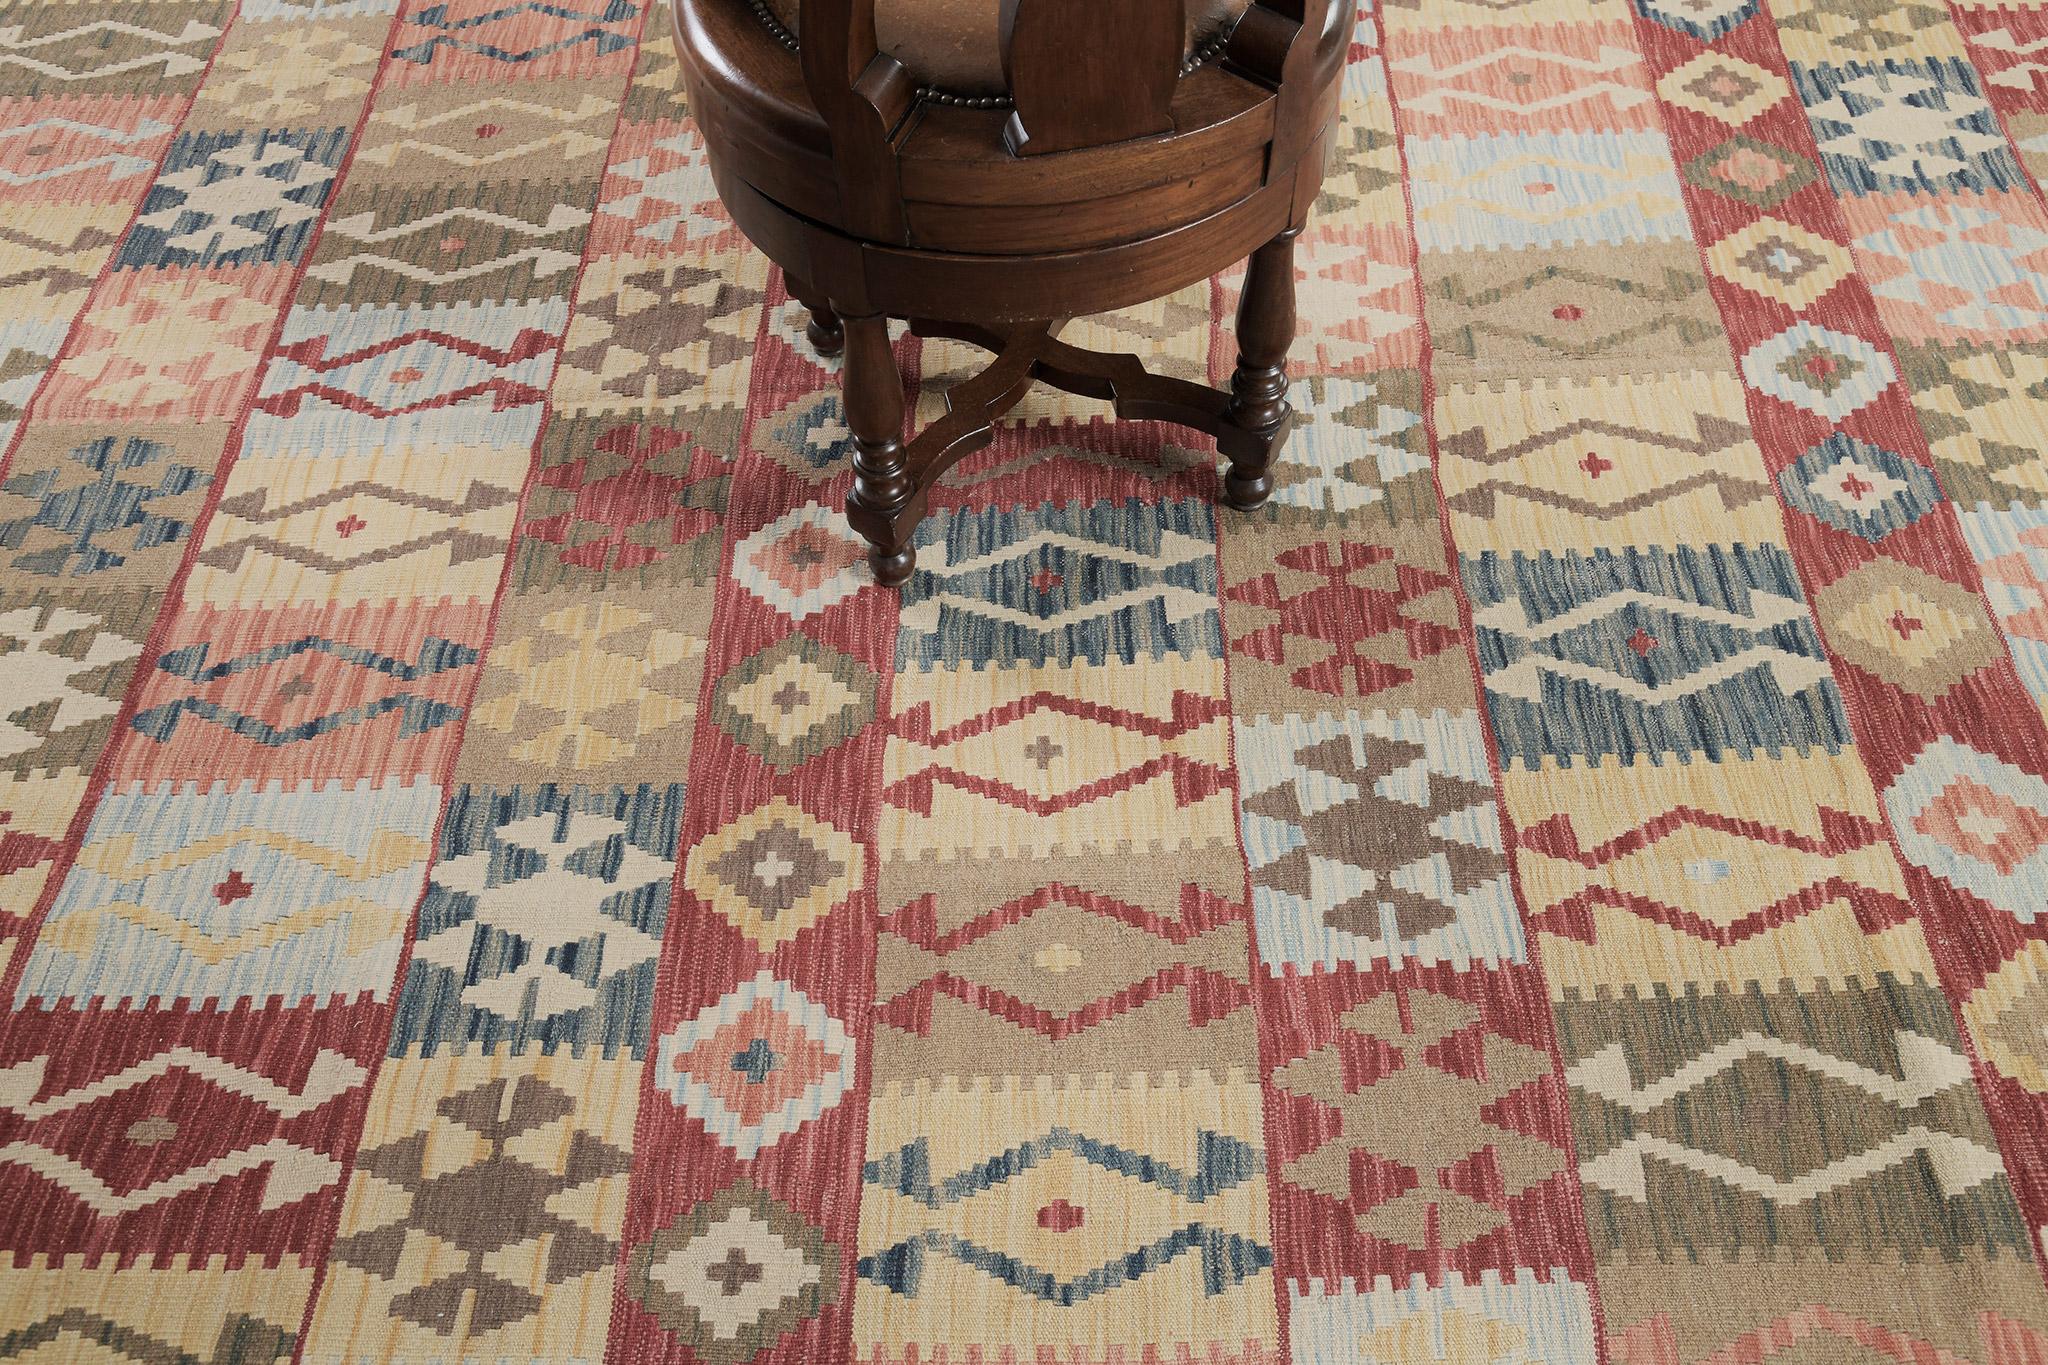 Eye, fertility, and diamonds are set in panel patterns featured in our Vintage style Kilim. The gorgeous color palette are remarkably stunning in red, yellow, brown, white, and peach. It captivates the designer's interest to bring out the best